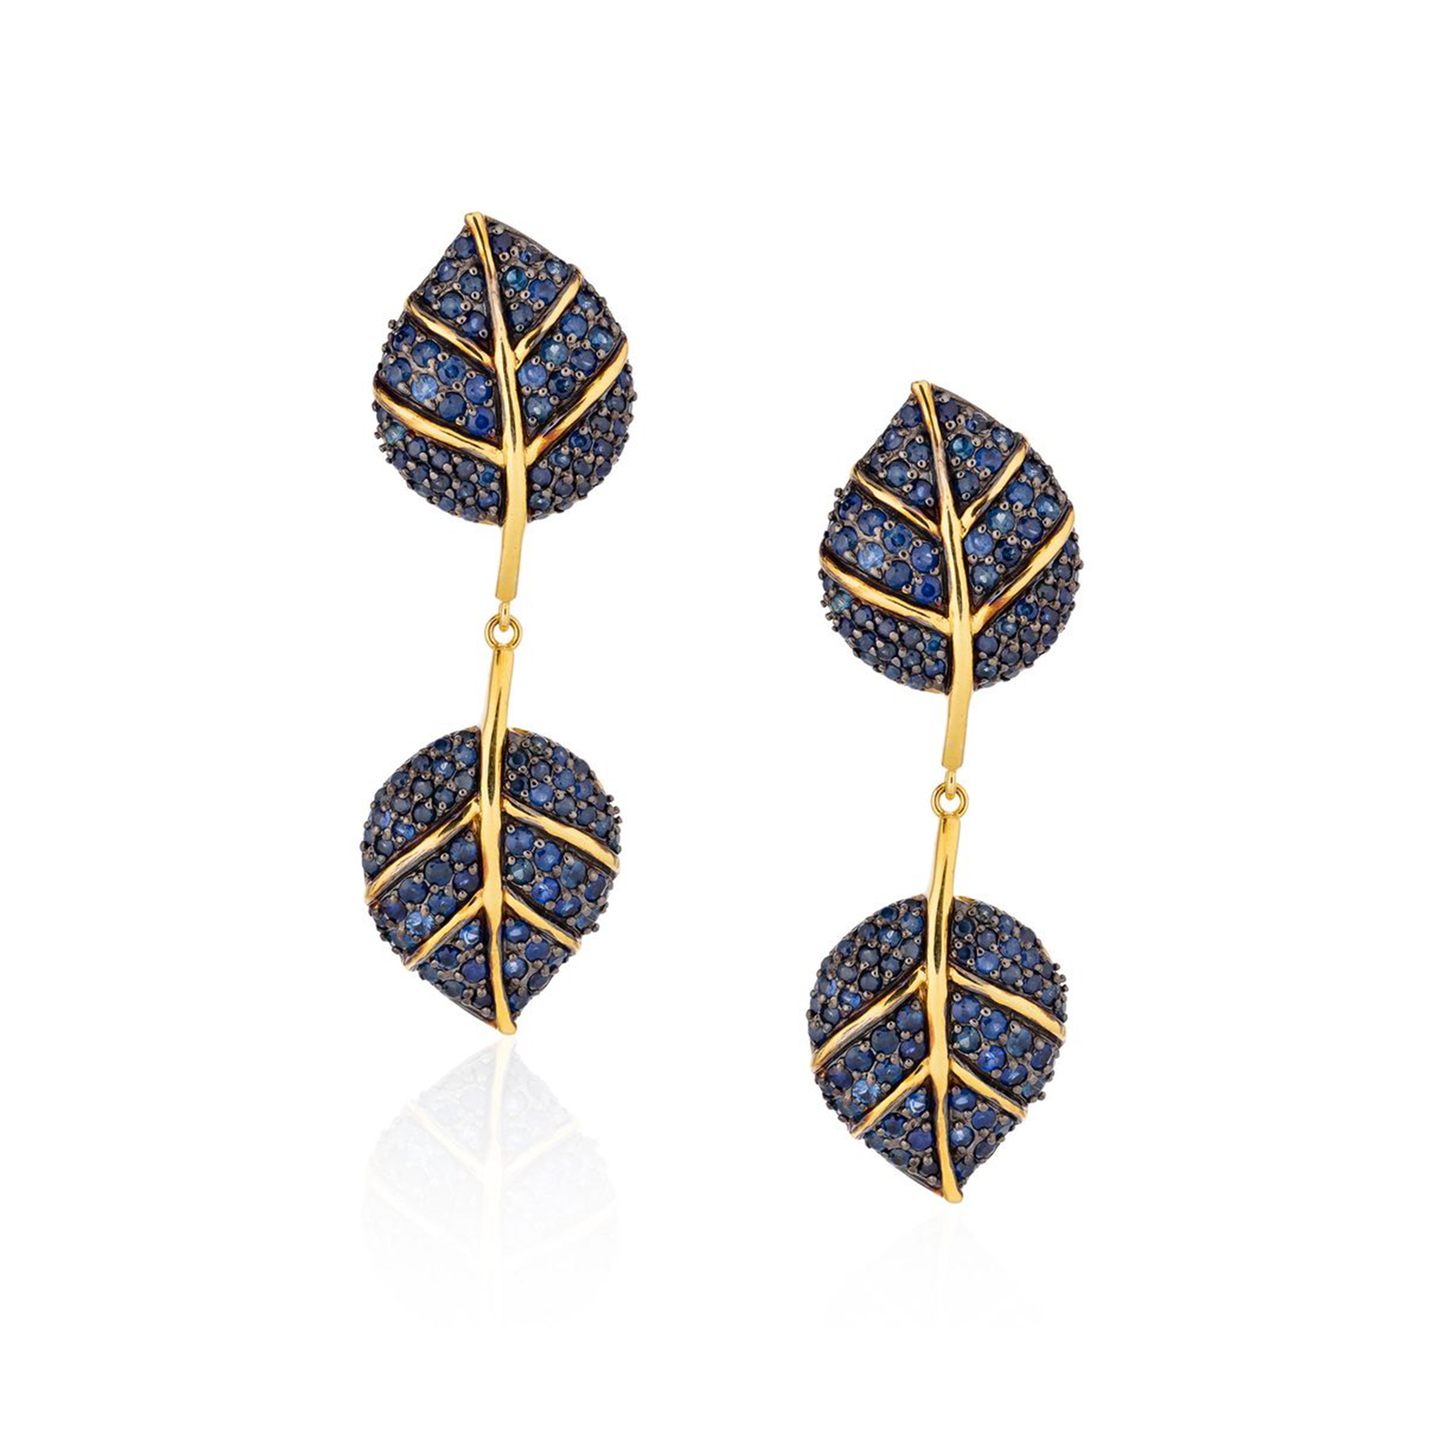 925 Silver Double Leaf Earrings with Blue Sapphires